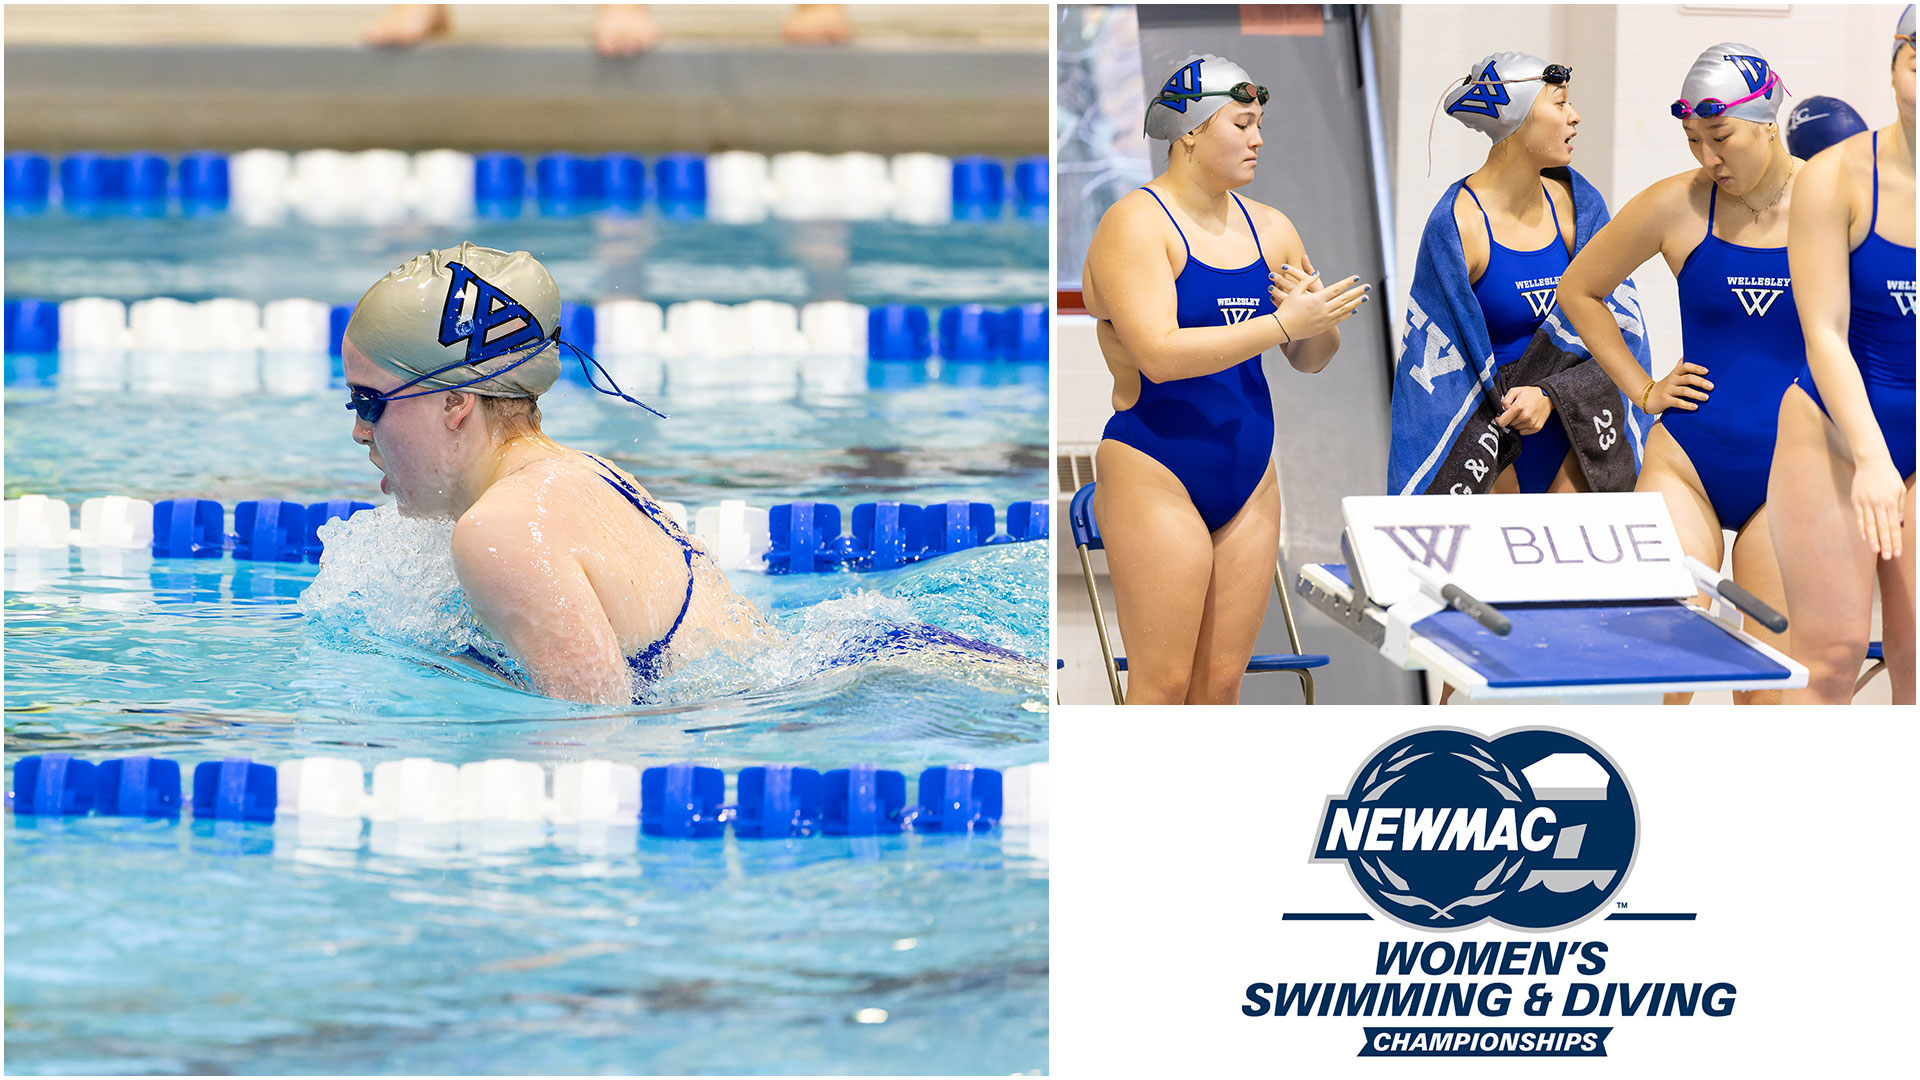 Wellesley swimming & diving competes at the NEWMAC Championships beginning on Thursday, February 22 (Frank Poulin)